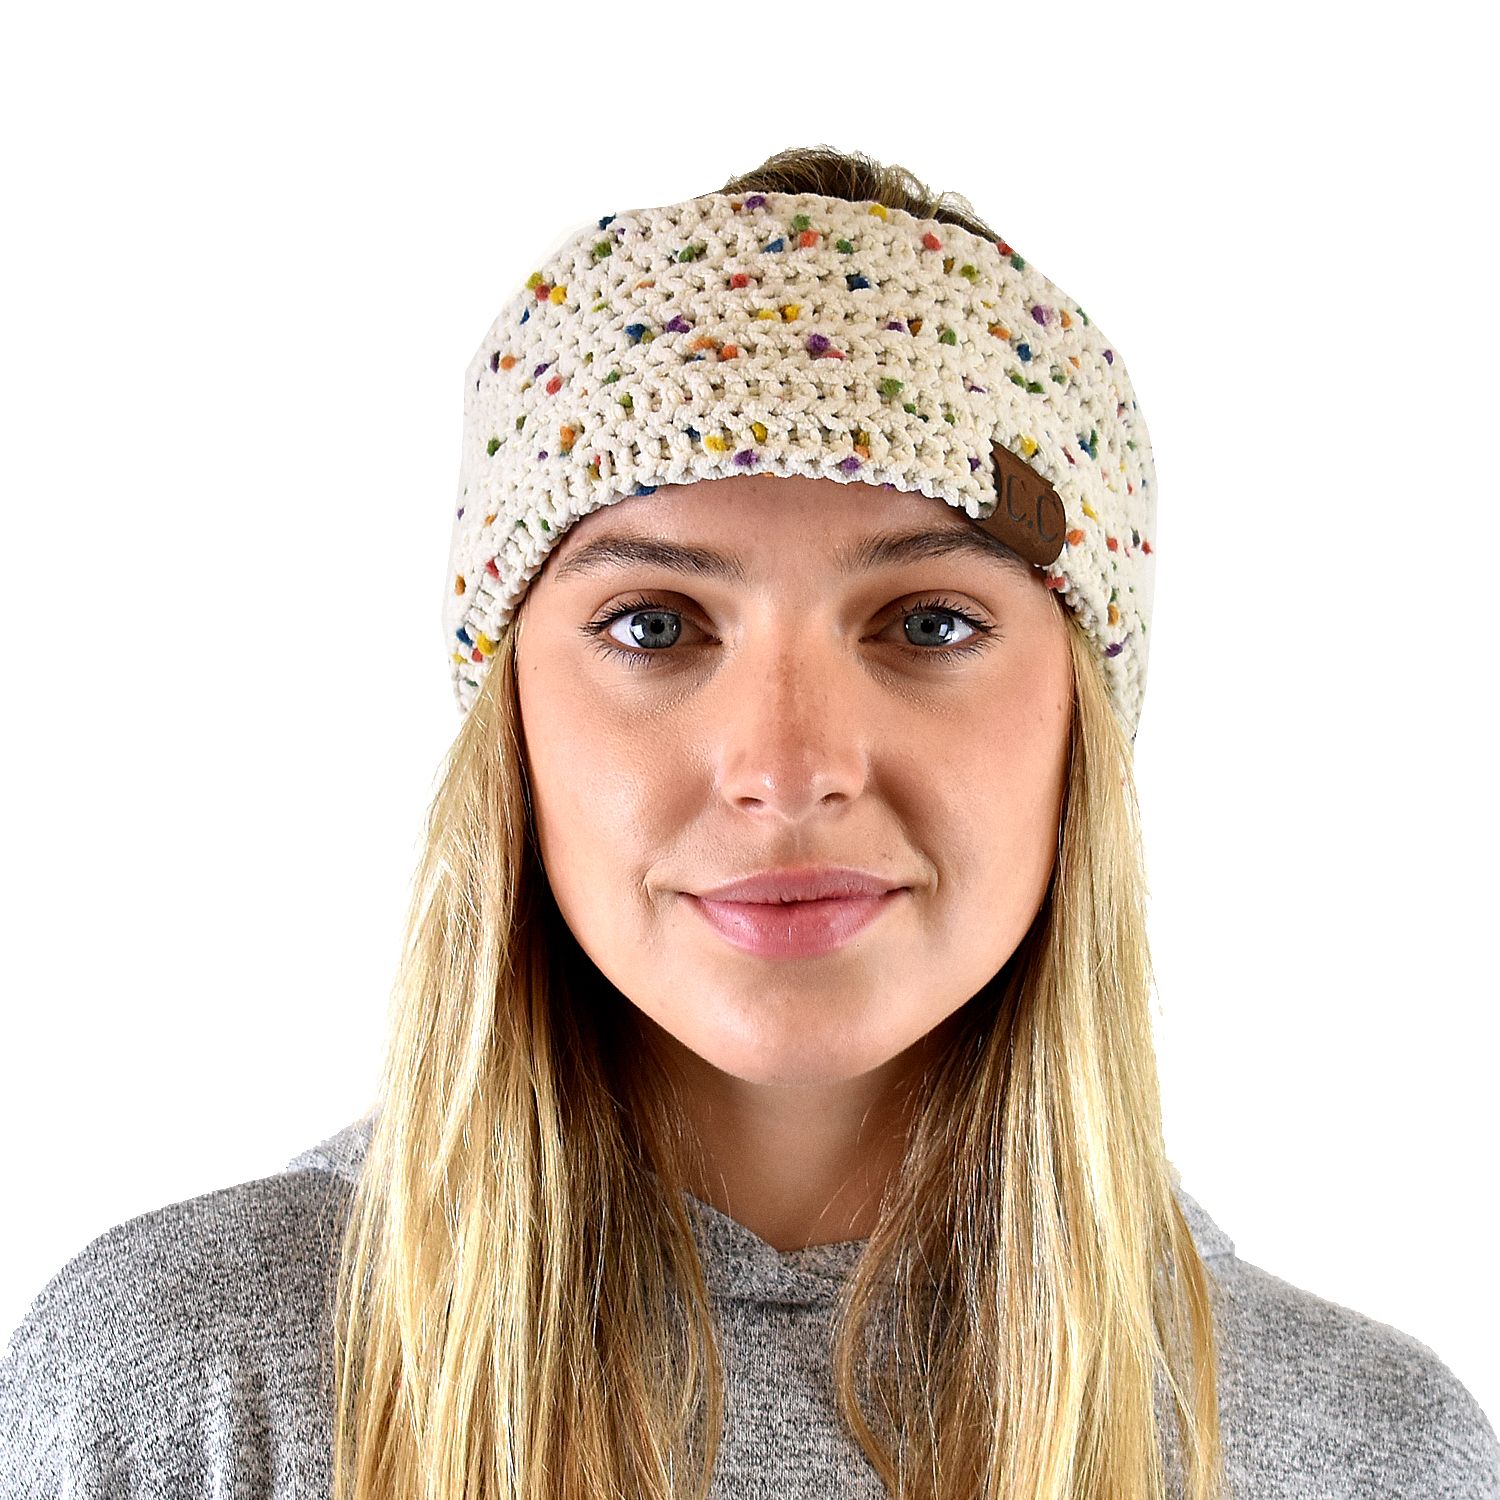 C.C Soft Stretch Winter Warm Cable Knit Fuzzy Lined Ear Warmer Headband, Chenille Confetti Oatmeal - image 2 of 4